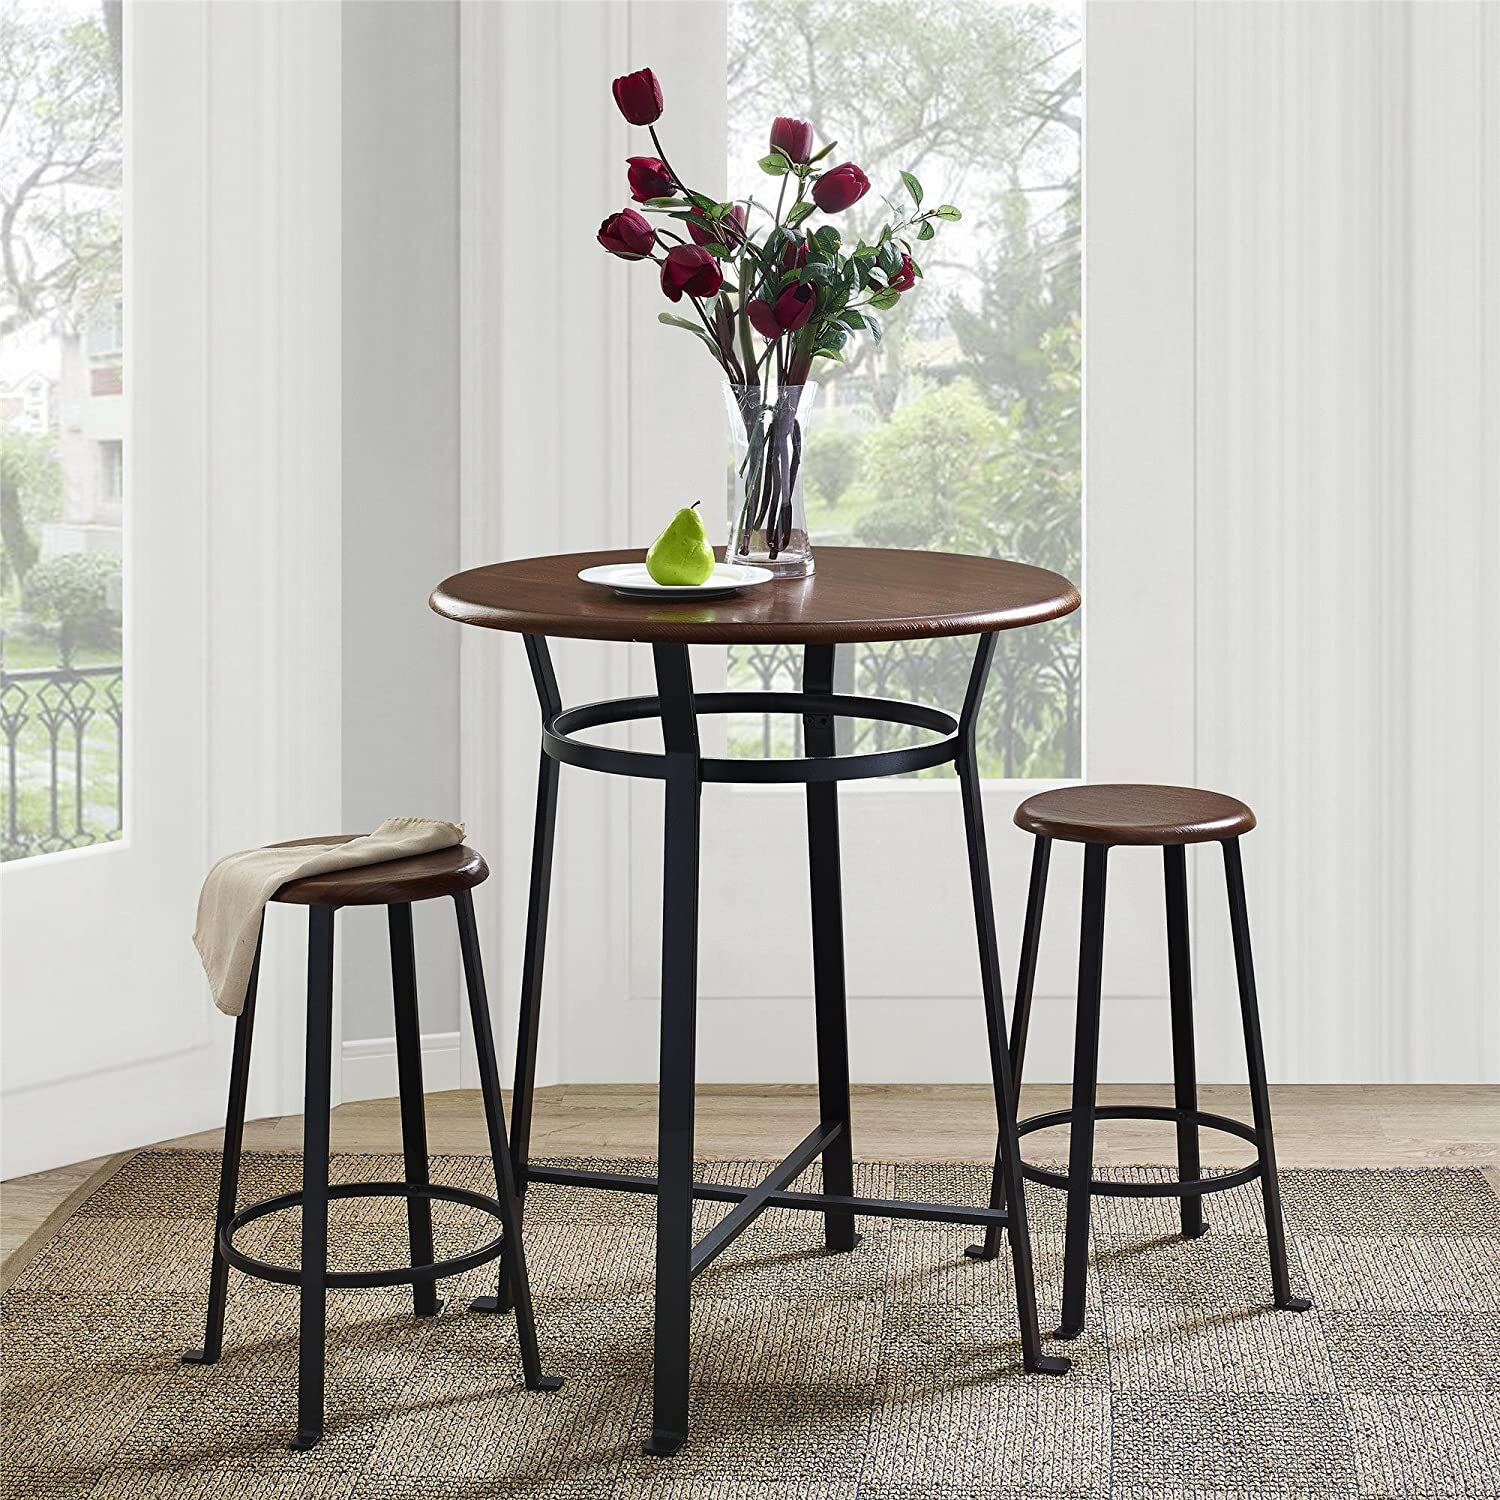 Wrought Iron High Table and Stools  